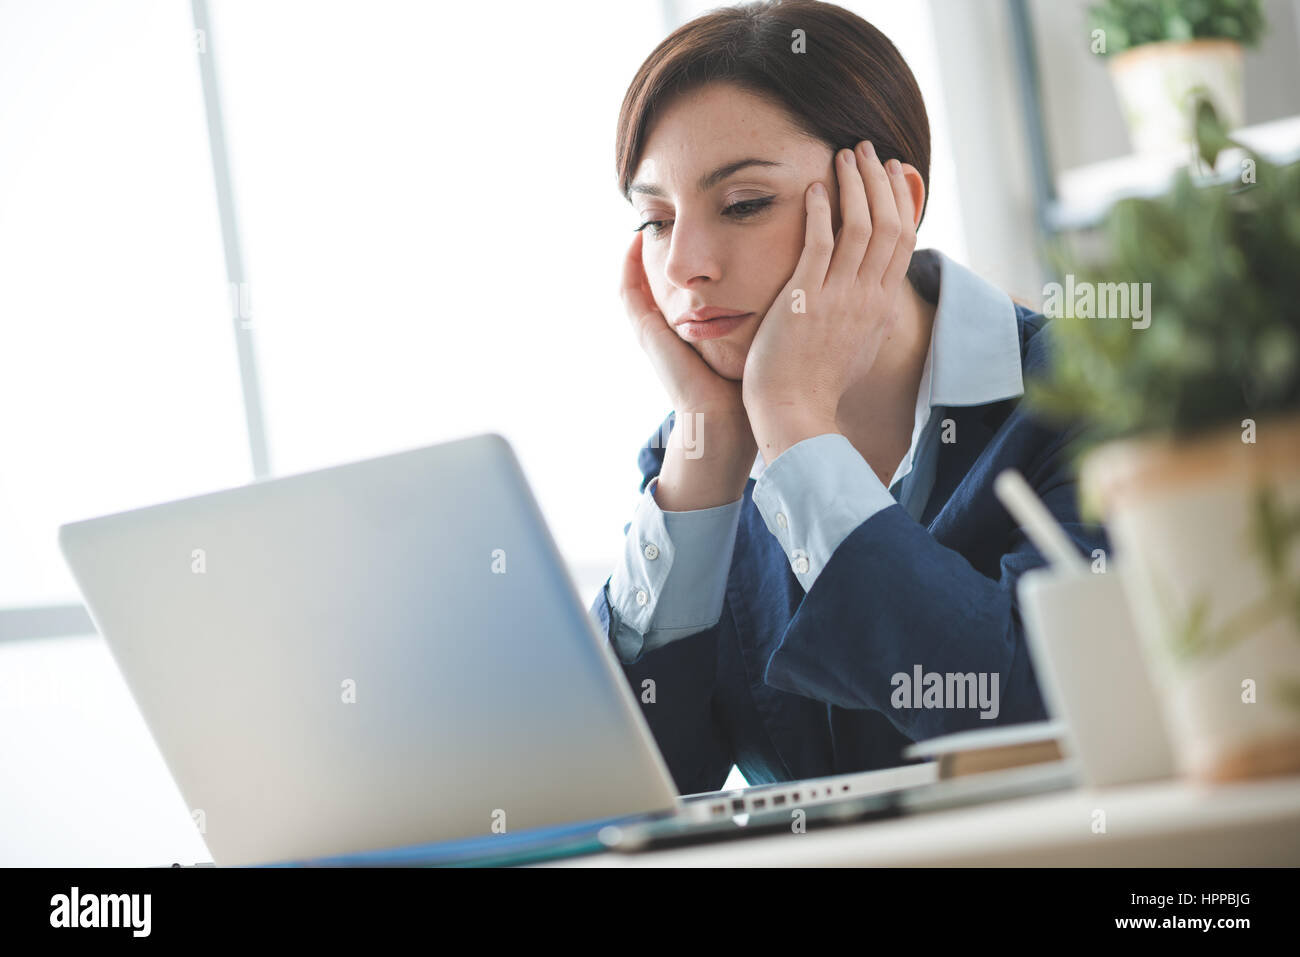 Depressed bored businesswoman working at office desk and networking with a laptop, boring job concept Stock Photo